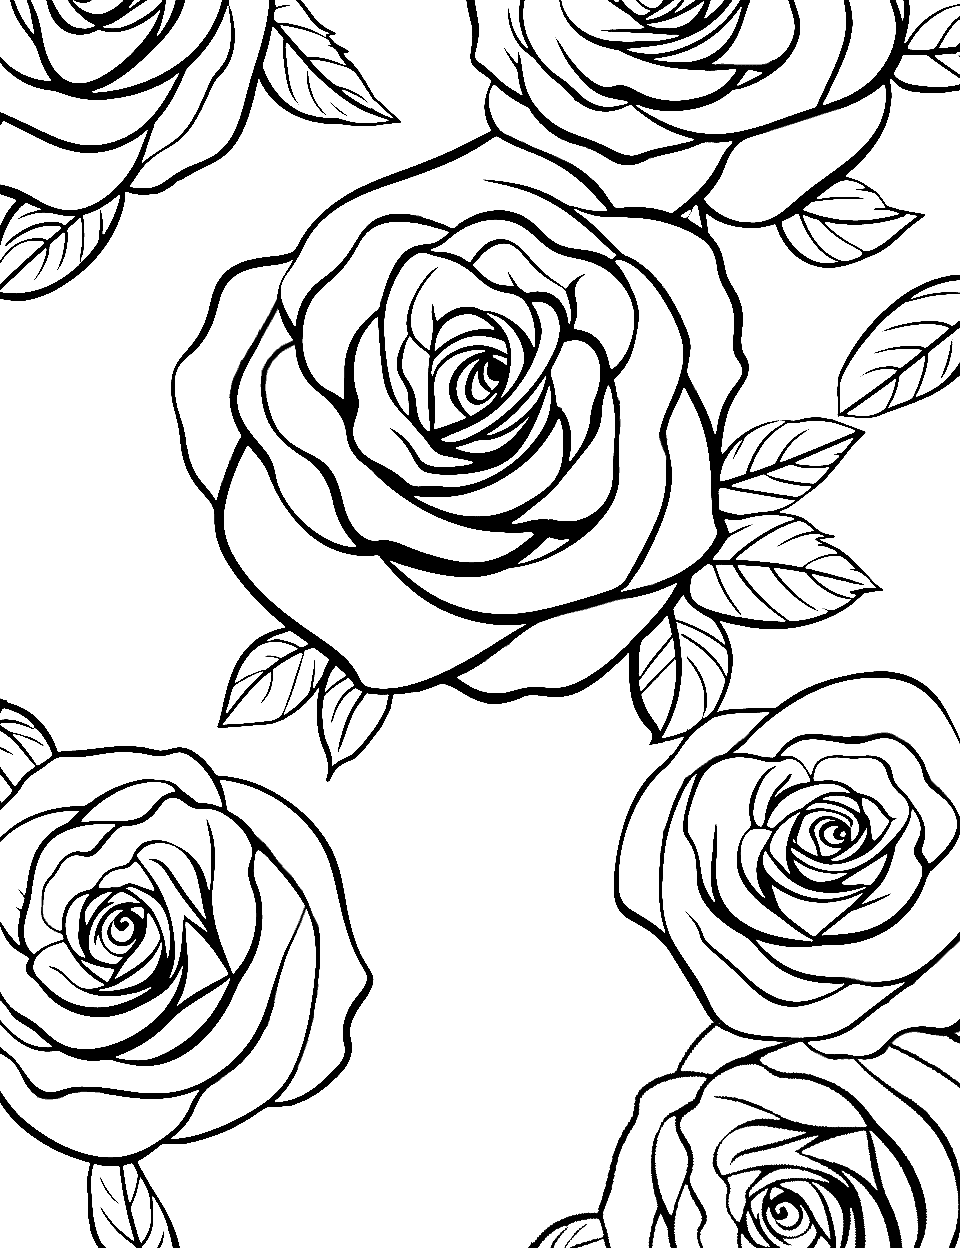 How to Draw a Rose step by step Easy - YouTube